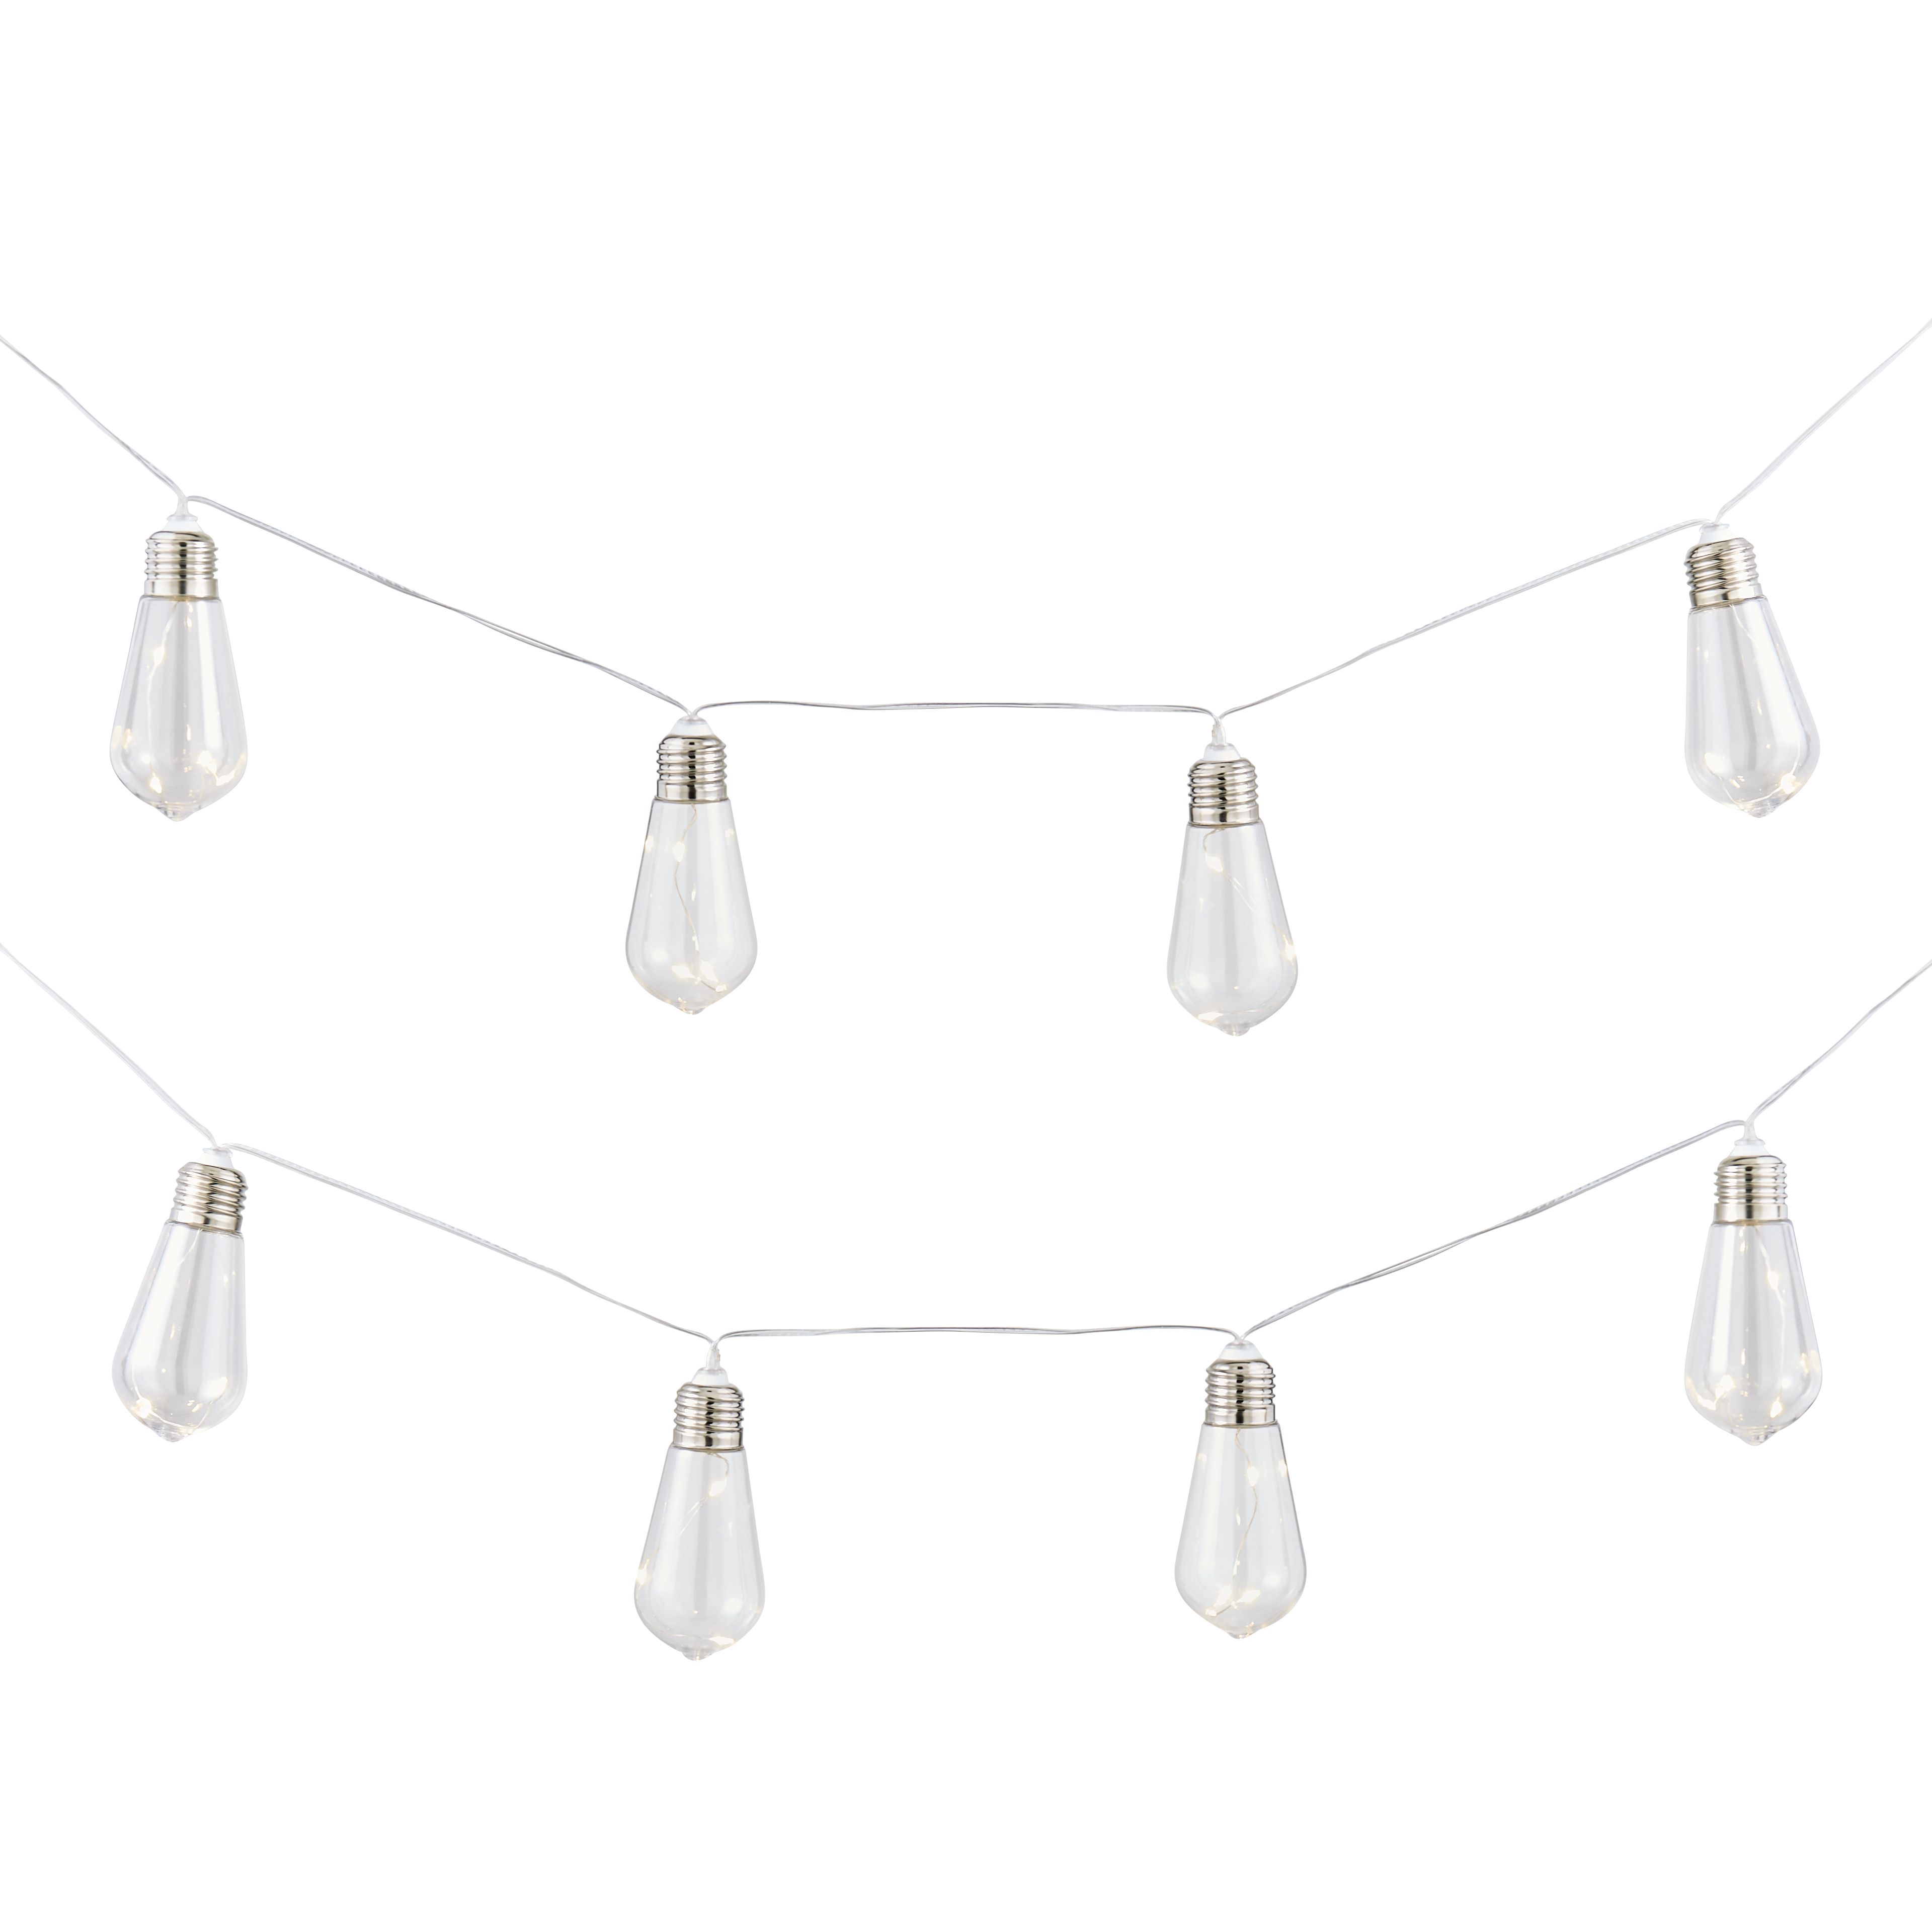 Inlight Vintage Solar-powered Warm white 10 LED Outdoor String lights